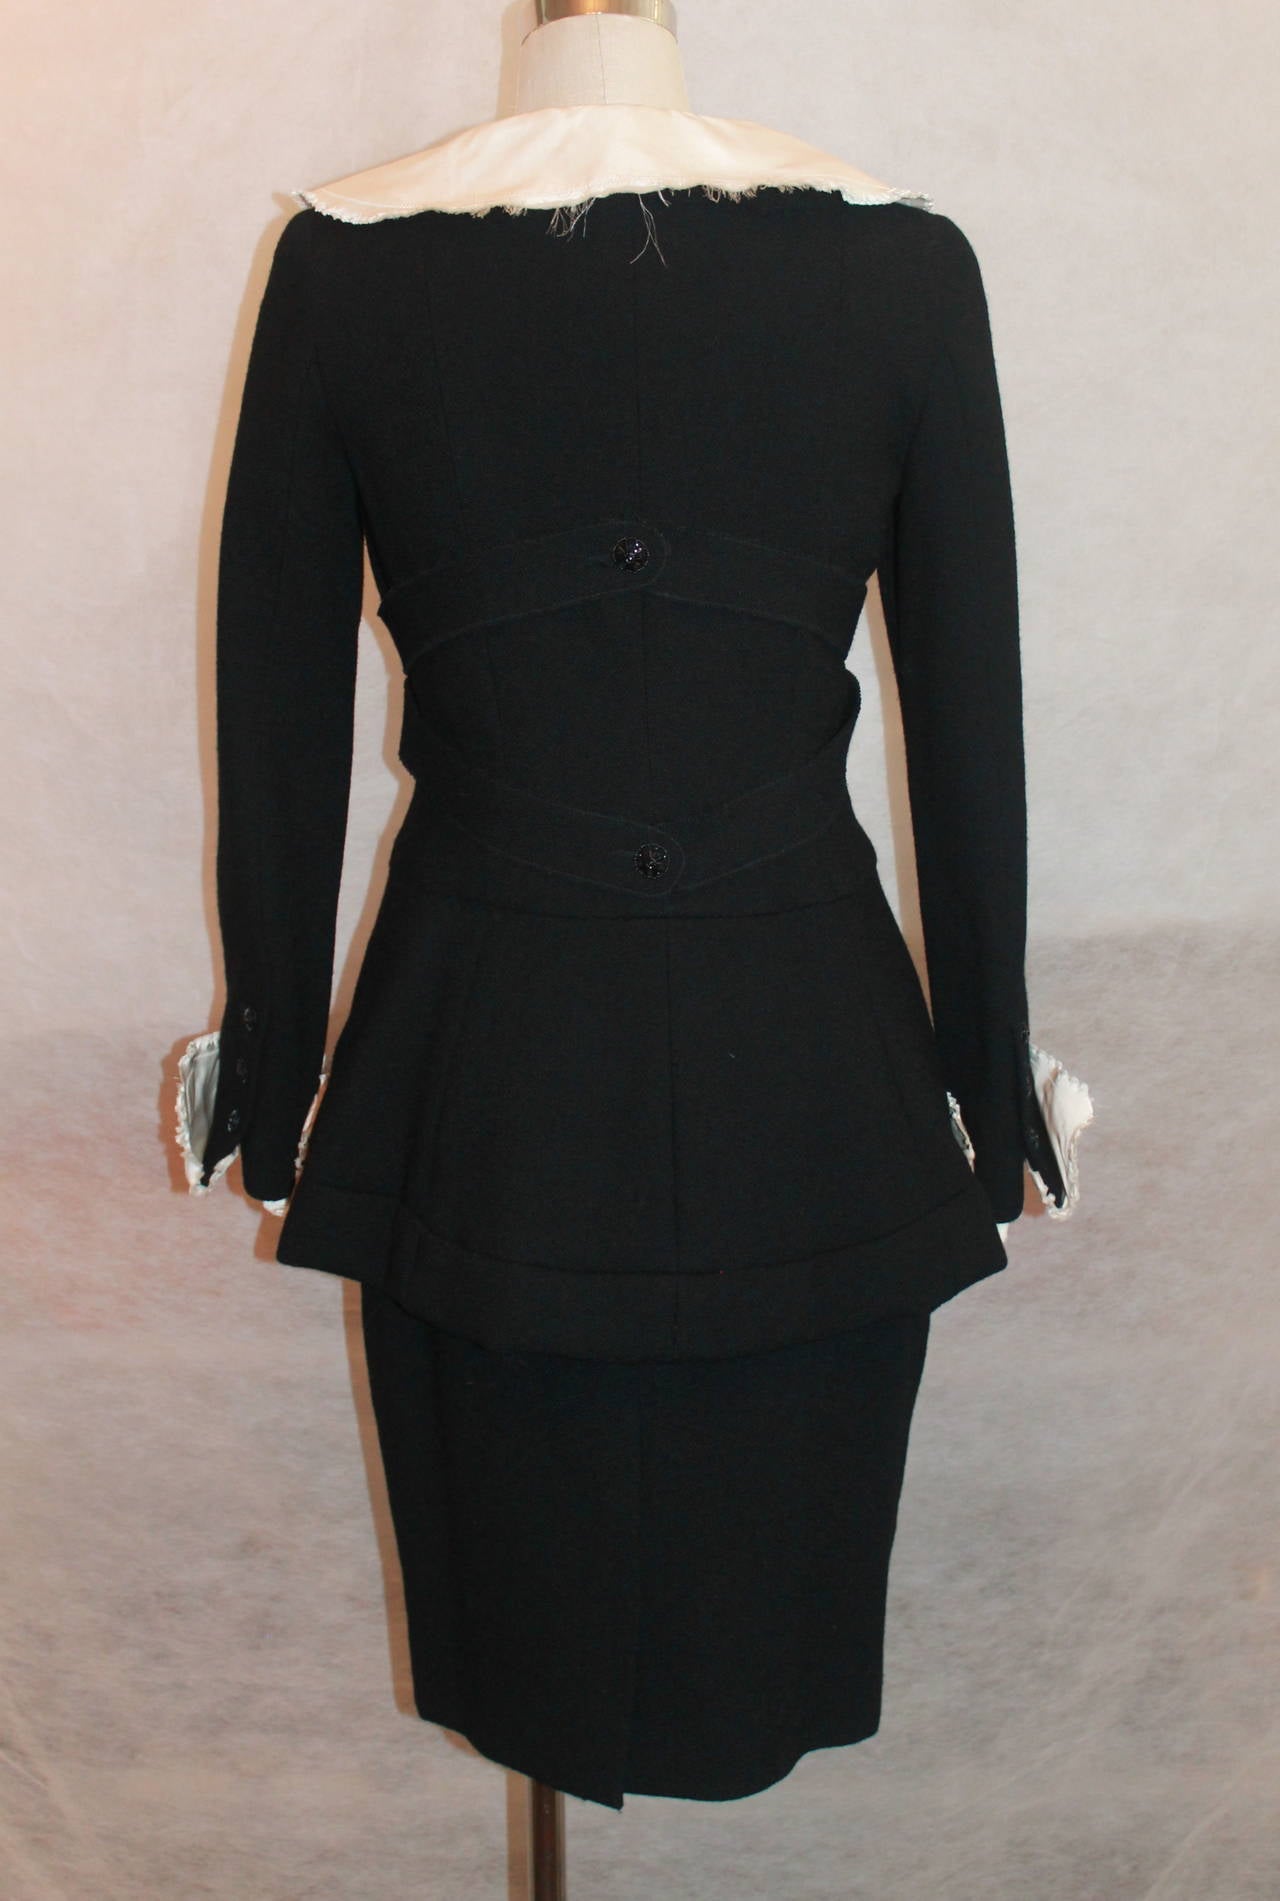 Chanel Black Wool Skirt Suit w/ removable white collar and cuffs-38-2008 3